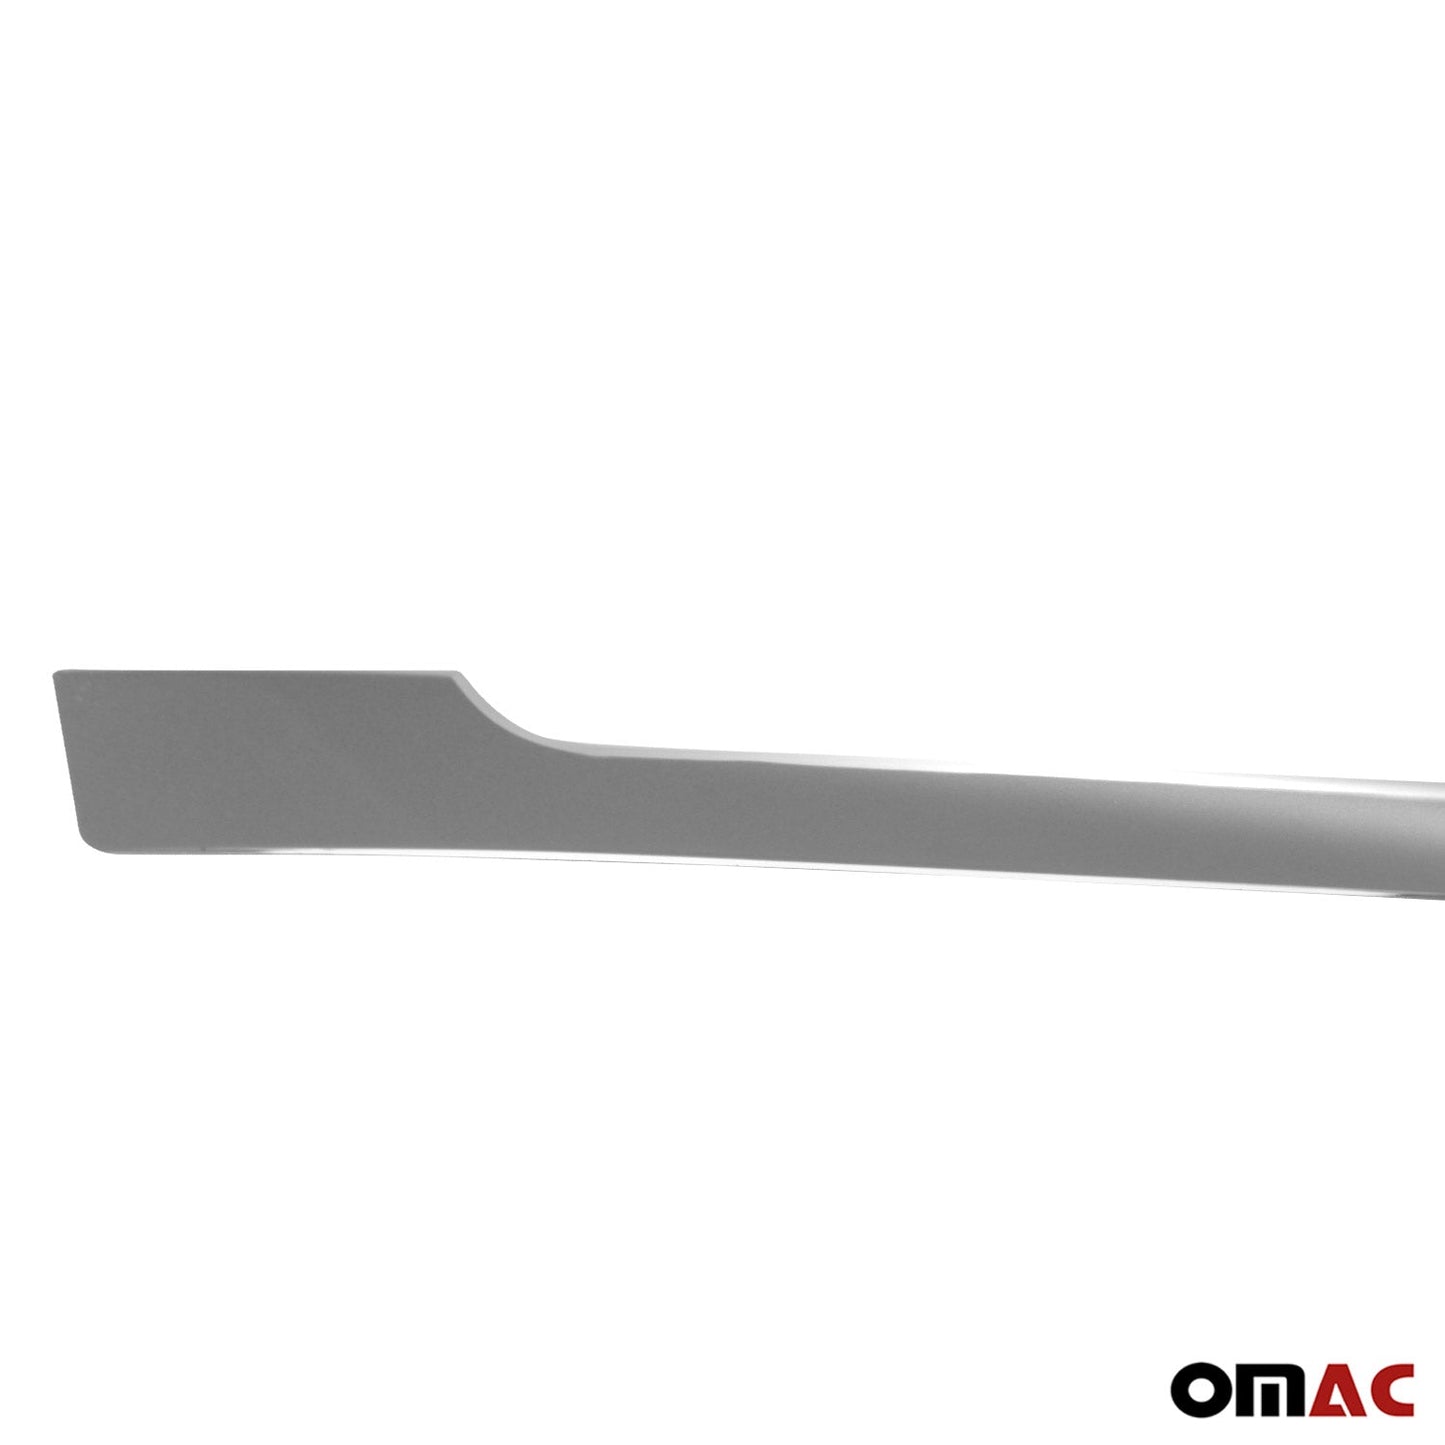 OMAC Rear Trunk Molding Trim for Peugeot 2008 2020-2024 Stainless Steel Silver 1Pc 5734052